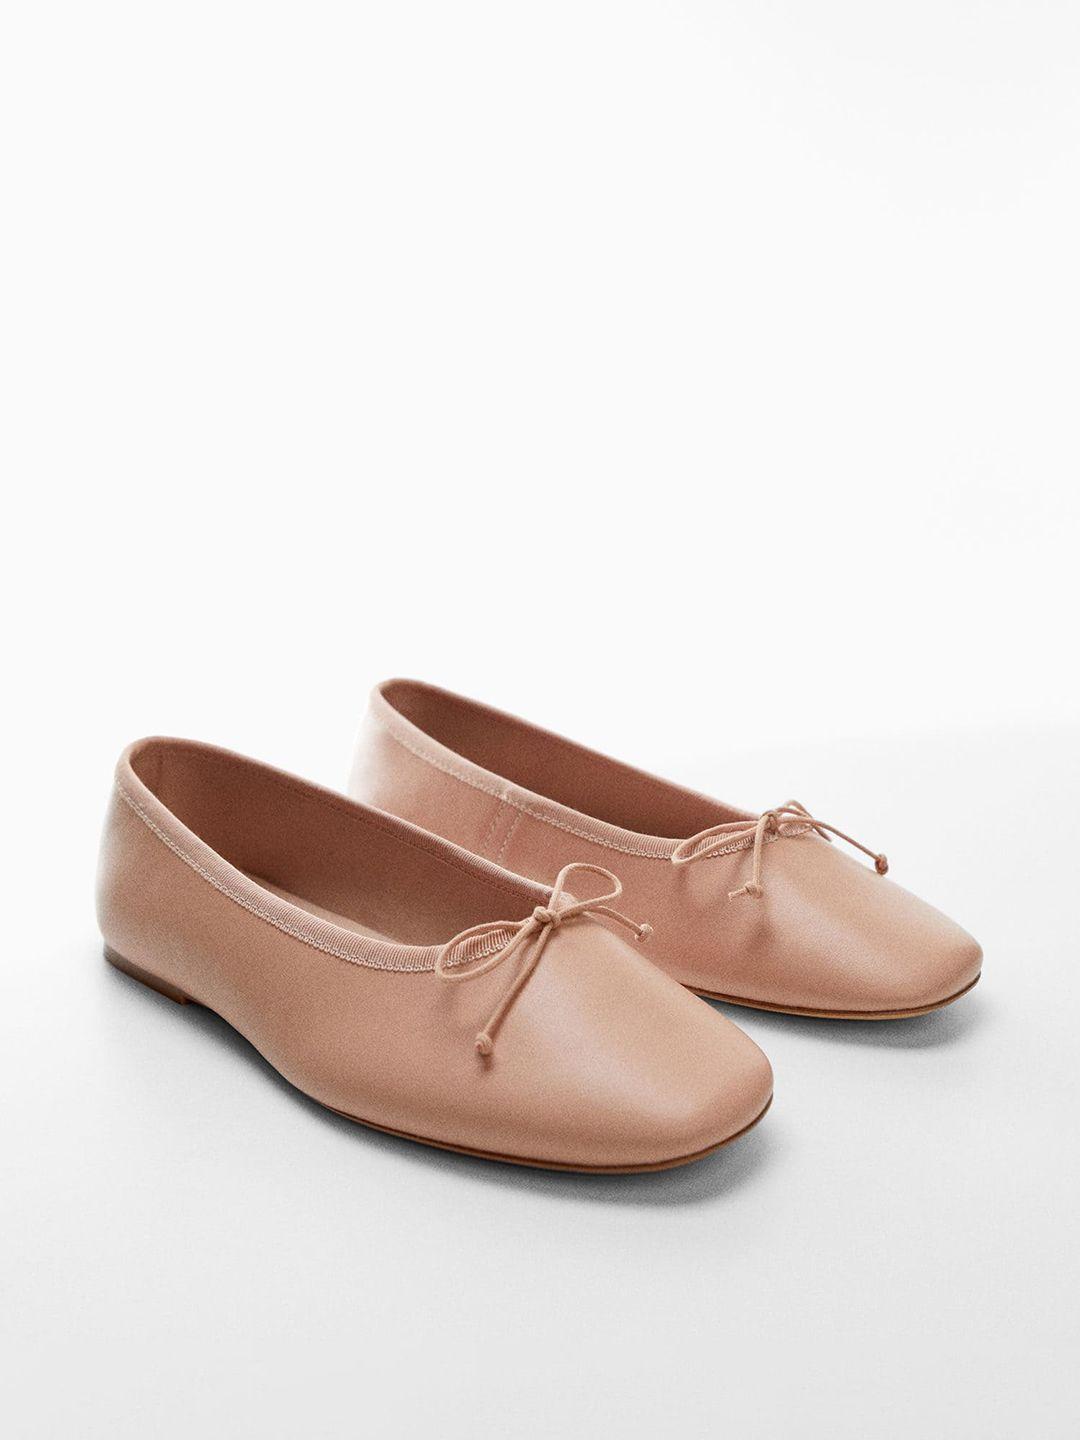 mango women leather sustainable ballerinas with bows detail